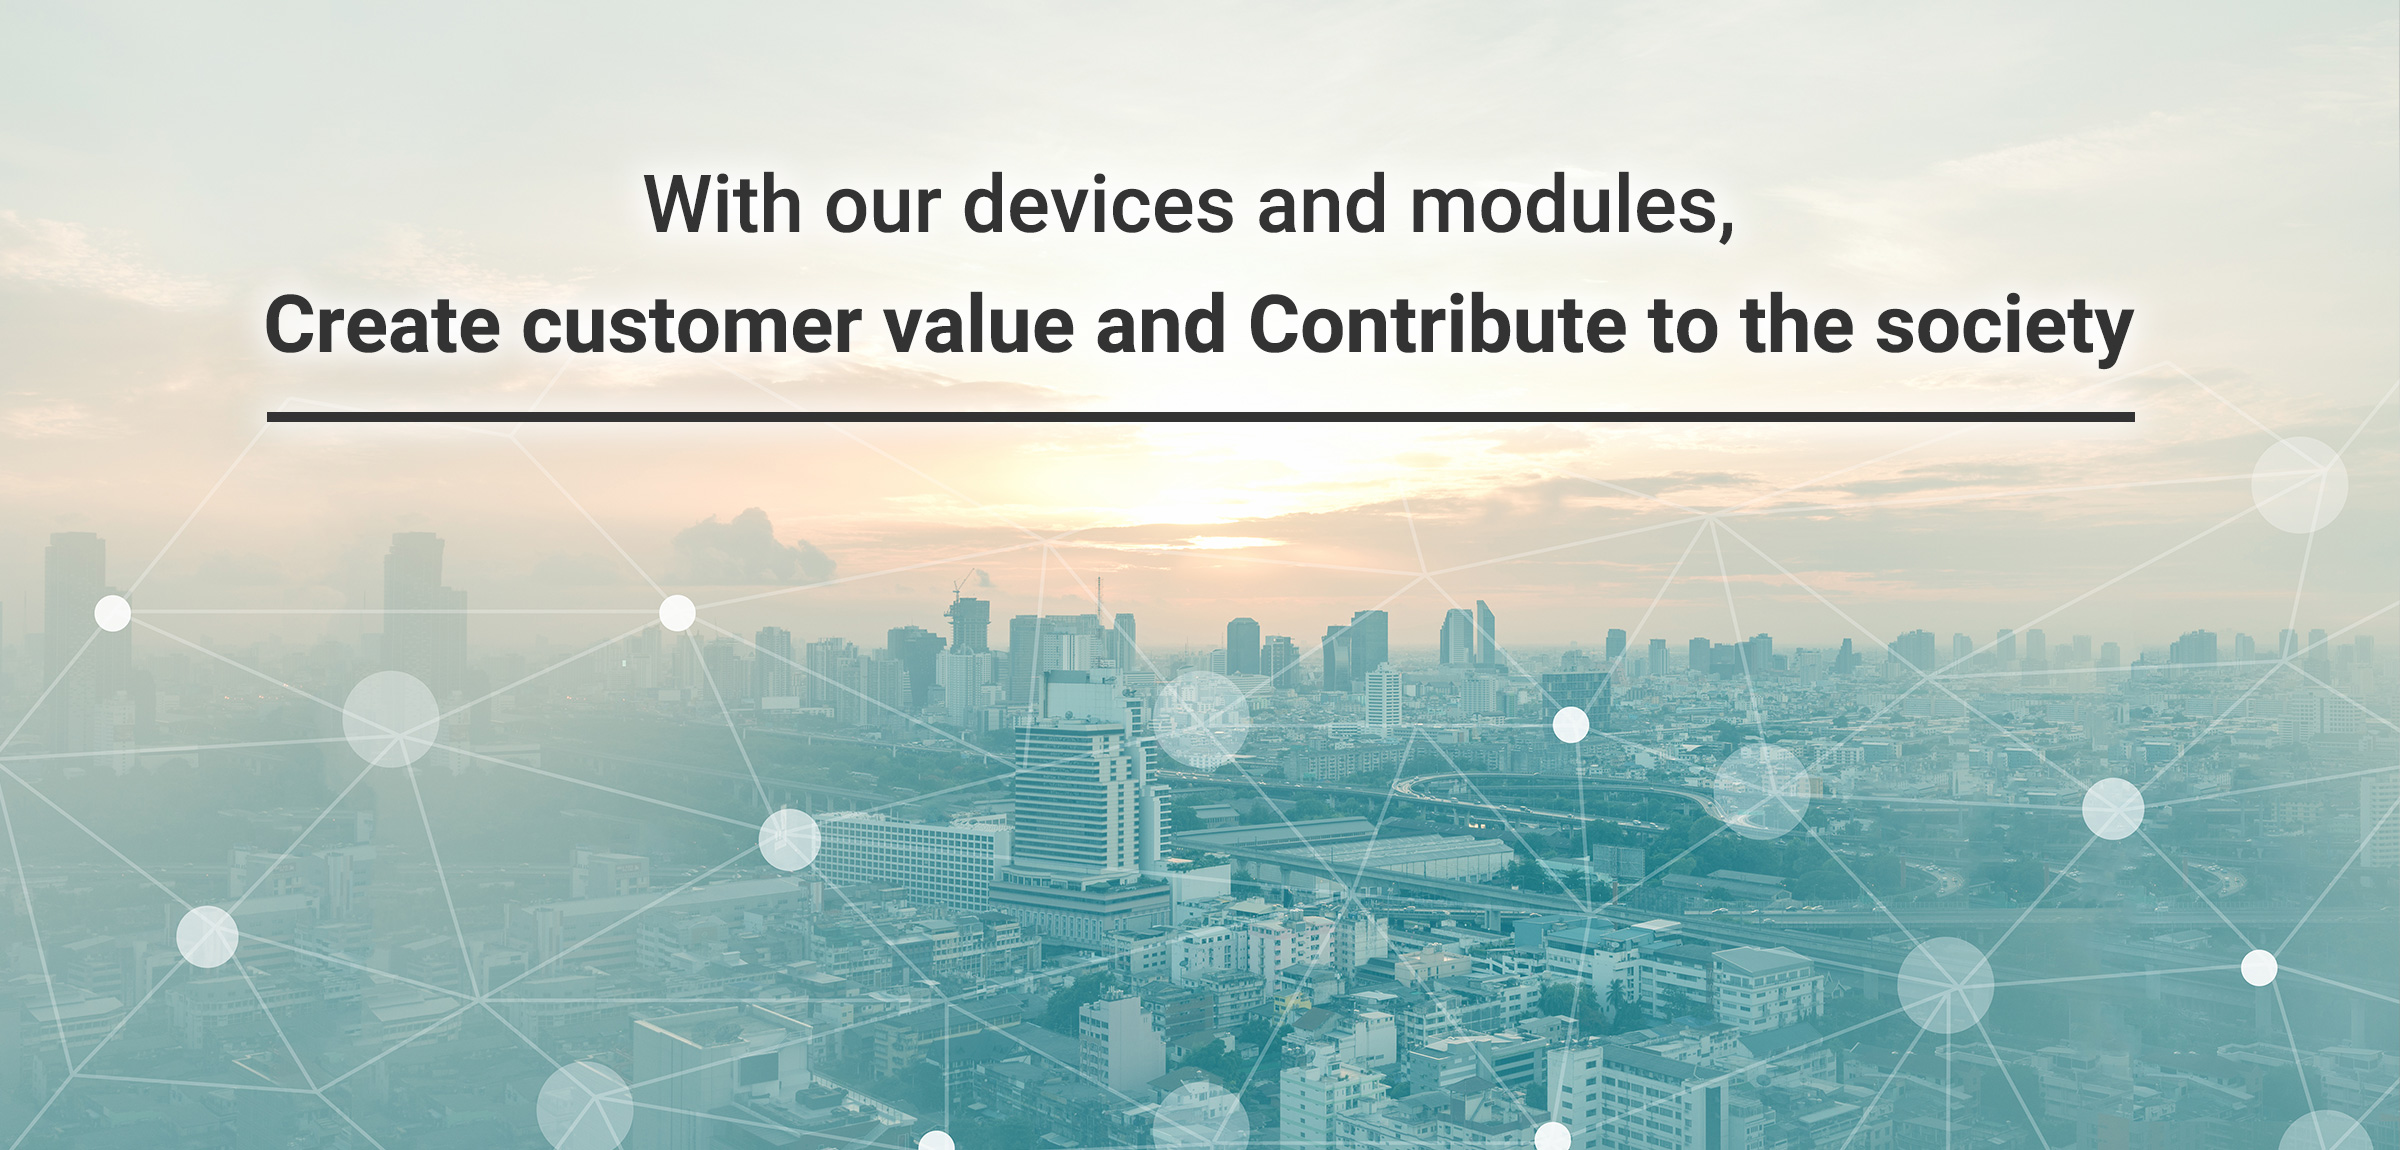 With our devices and modules,Create customer value,  and Contribute to the society.